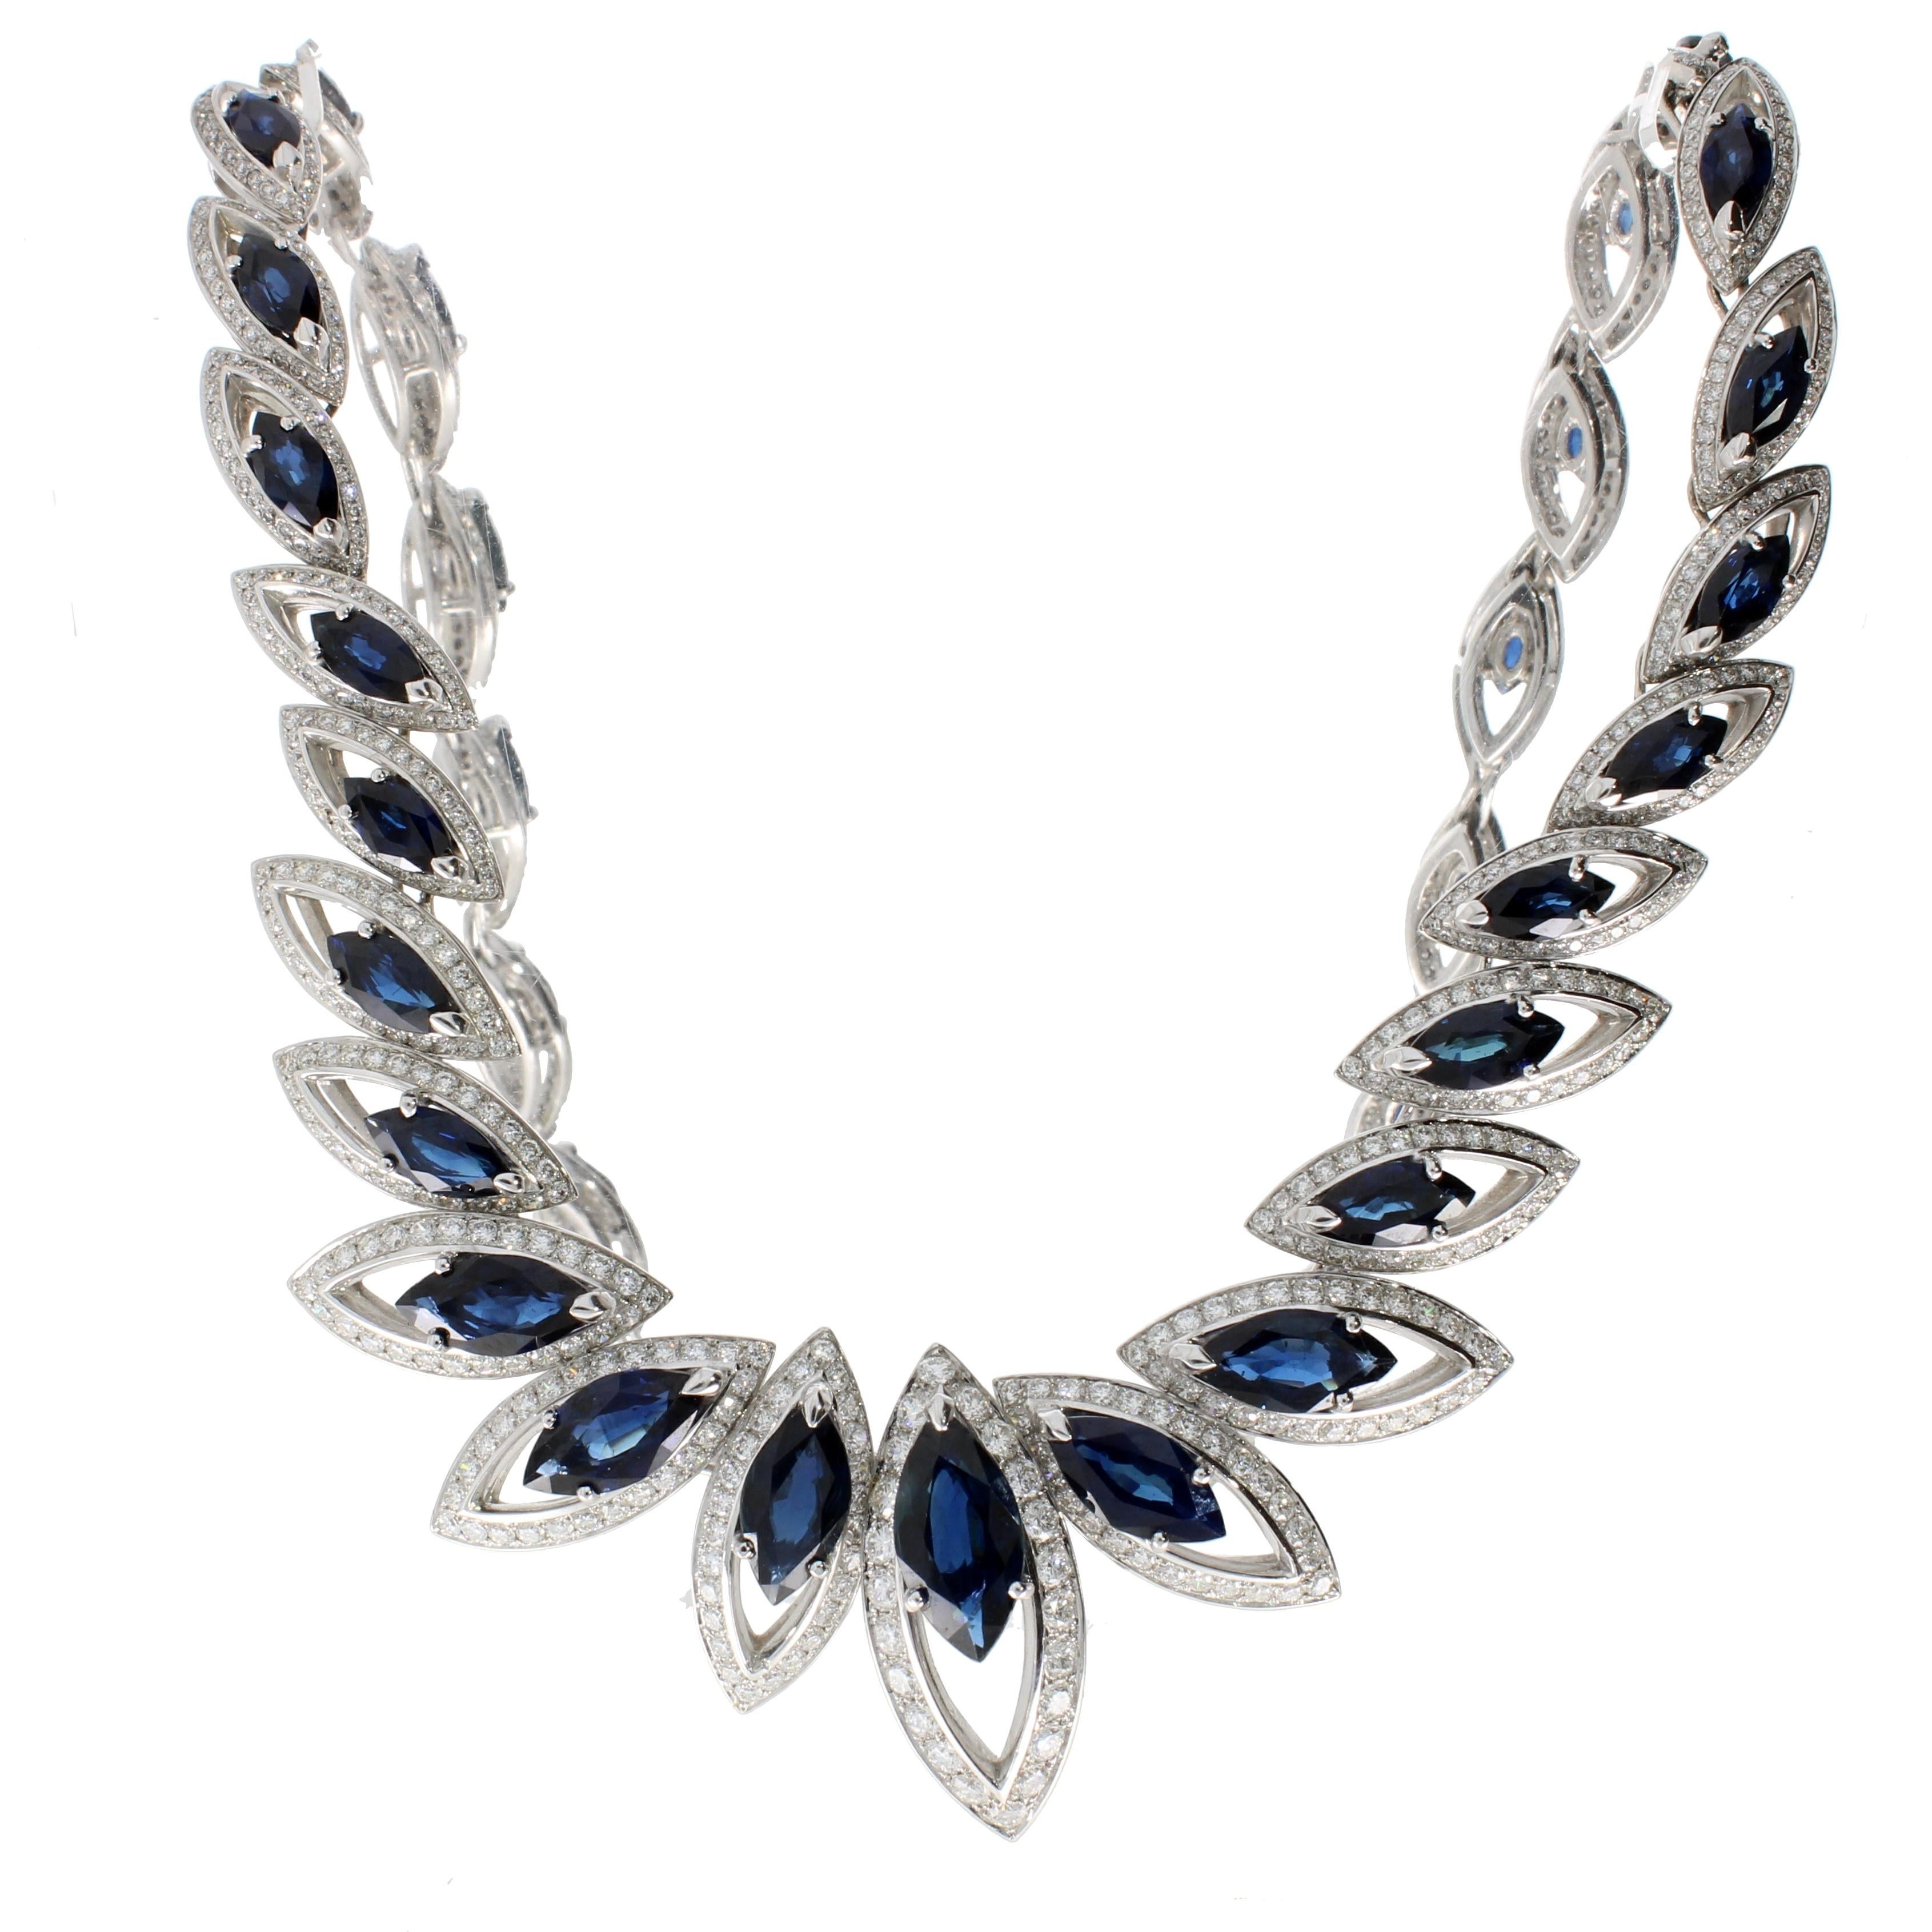 Tracing the delicate petals of a flower, signature marquise cut blue sapphires and brilliant cut diamonds form a sparkling garland around the neckline.

Details
Blue Sapphire and Diamonds Necklace
- 18 karat White Gold
- 23.8 carat Marquise Blue